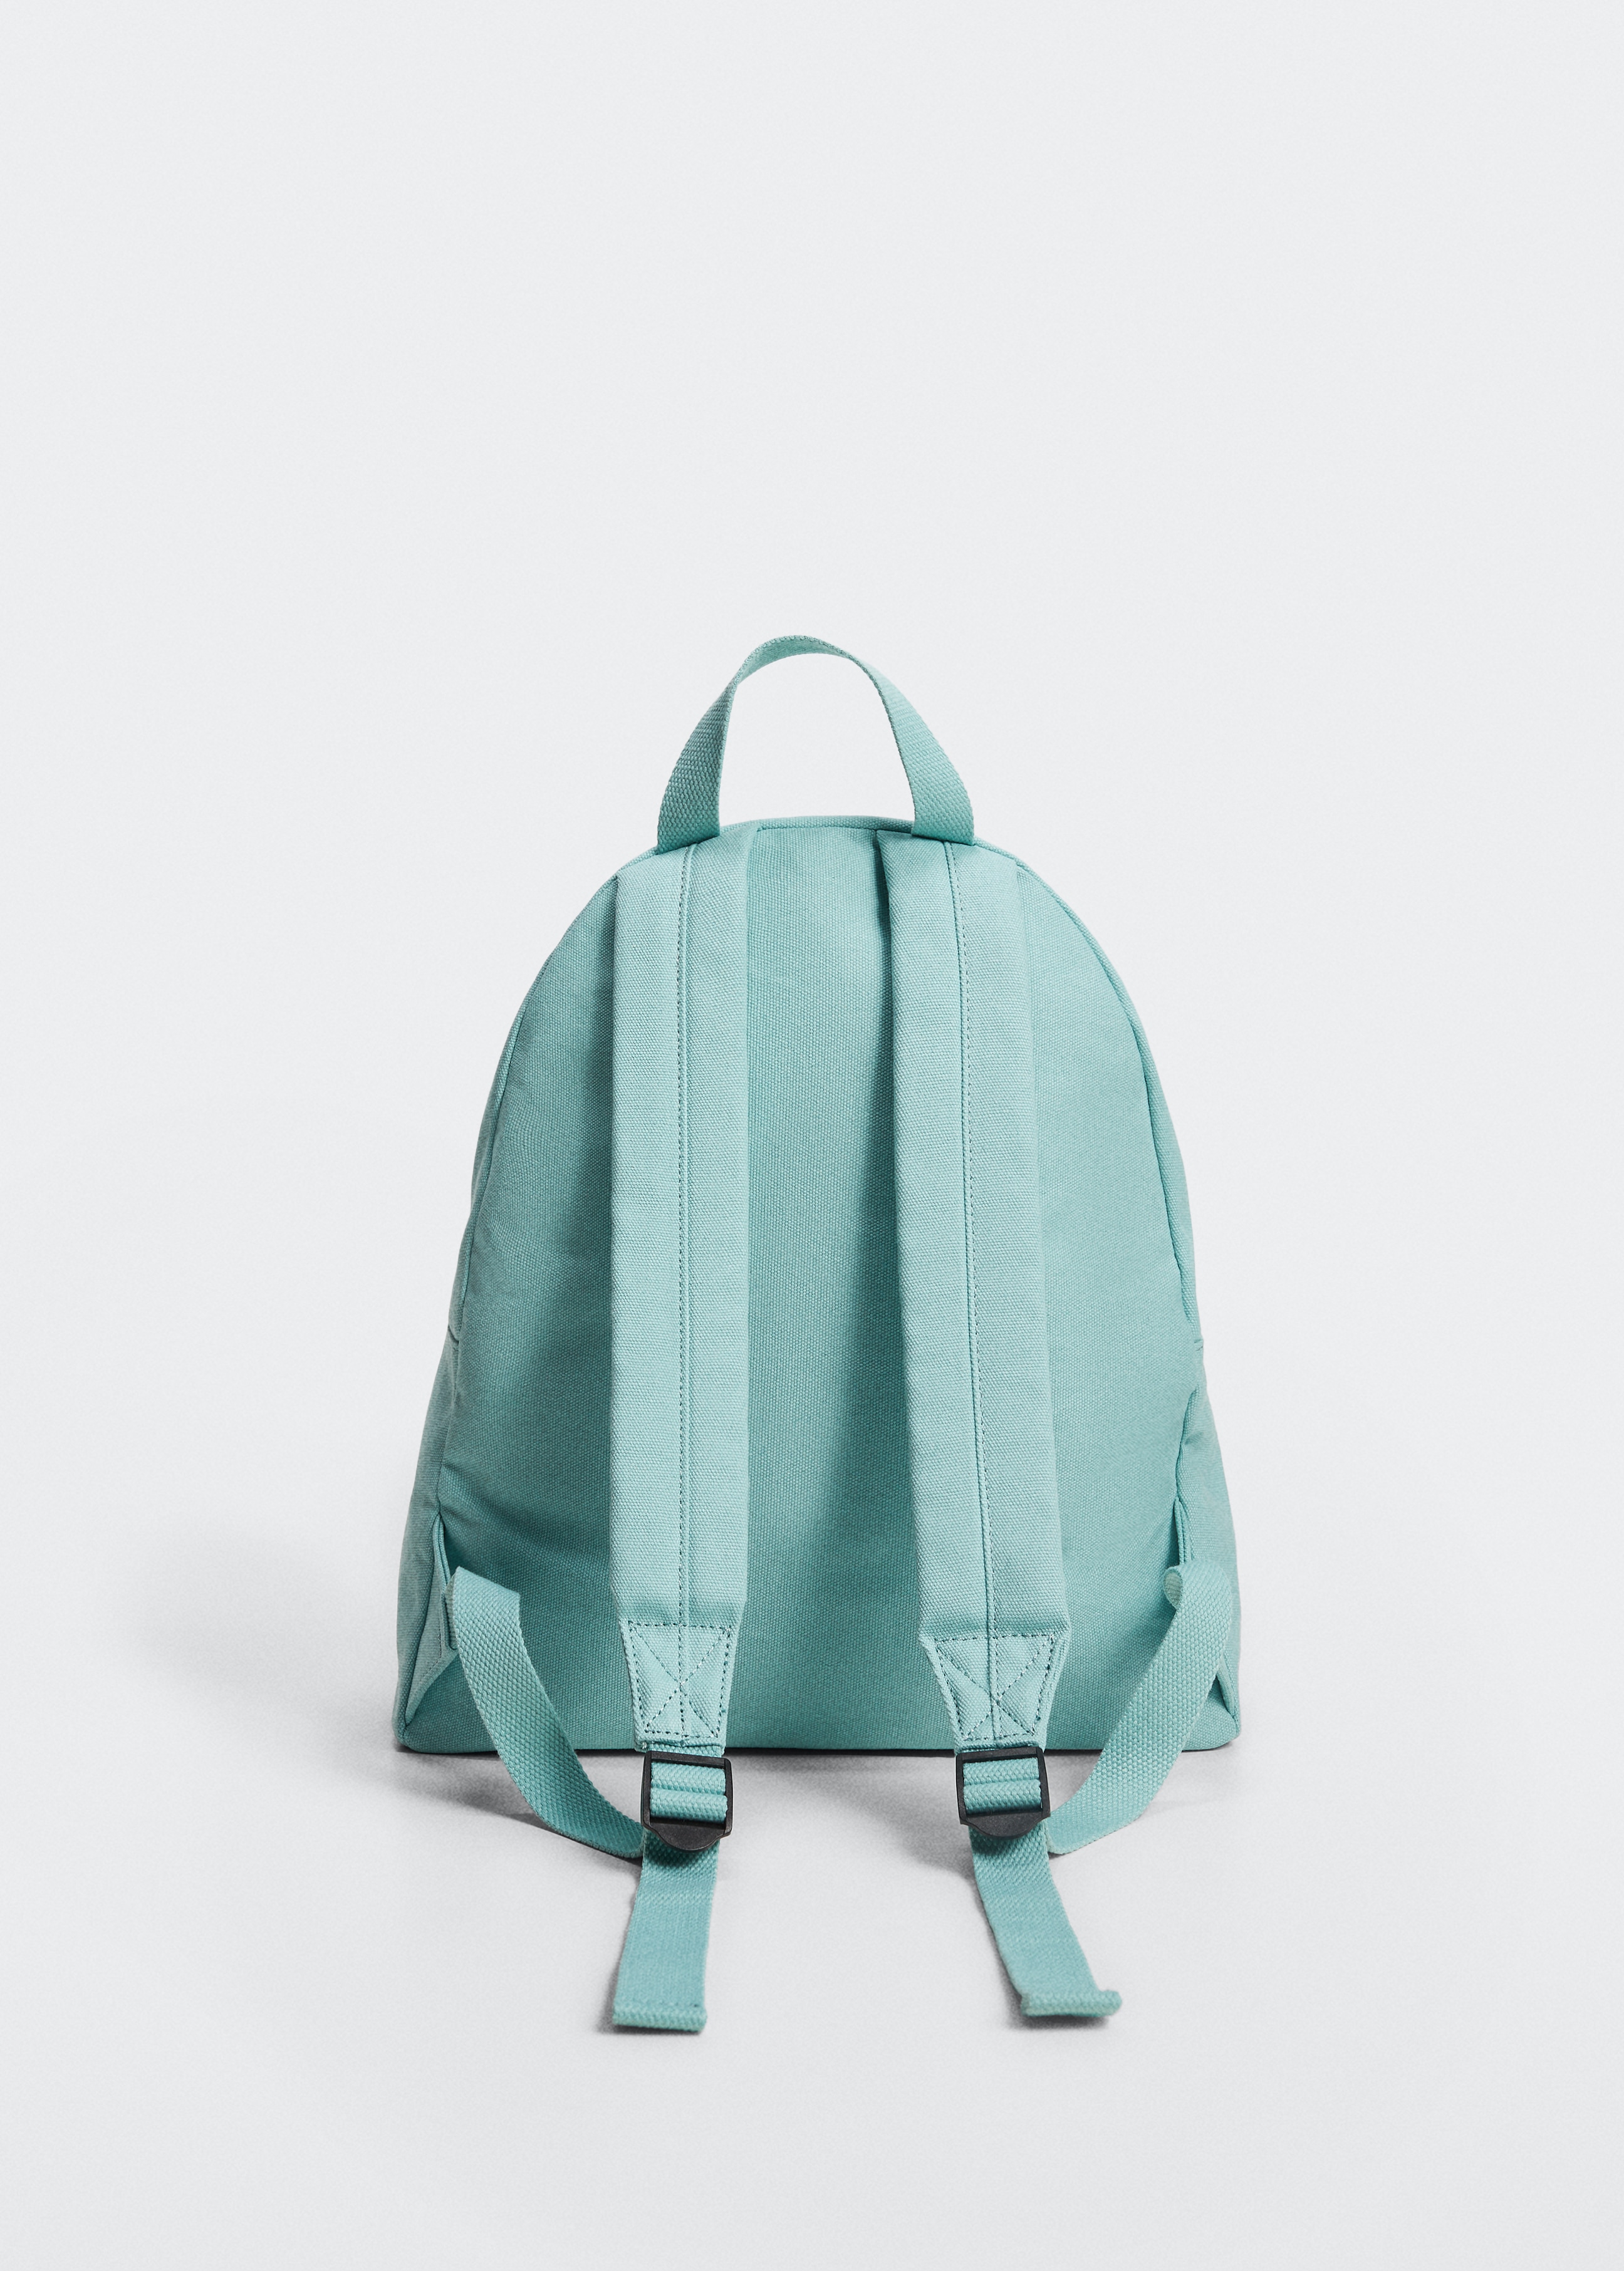 Cotton bag - Details of the article 3